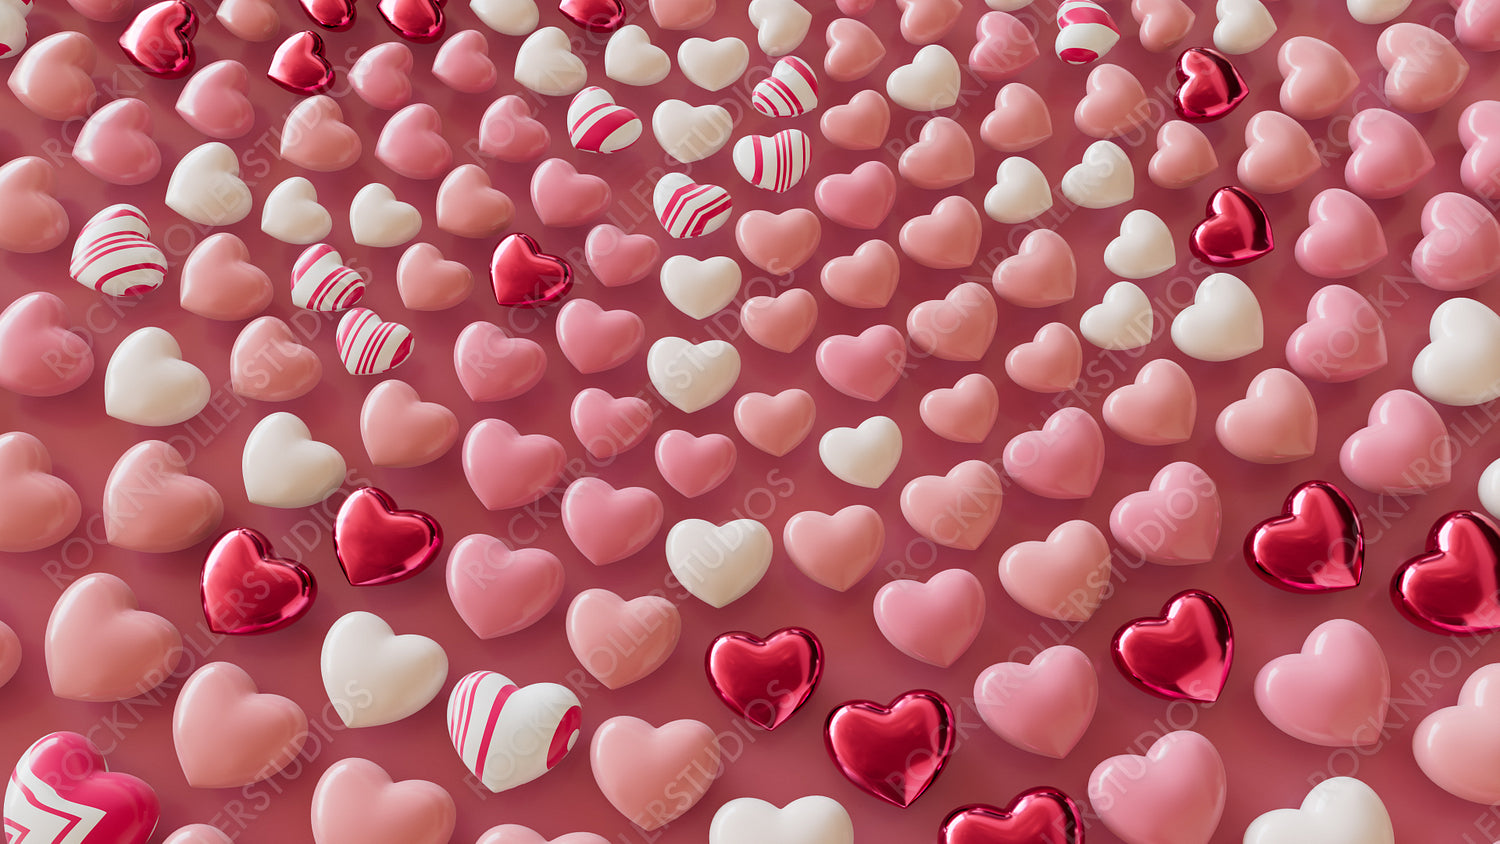 Pink, White and Red Metallic 3D Hearts arranged in the Shape of a Spiral. Romantic Valentine's Day Wallpaper. 3D Render.